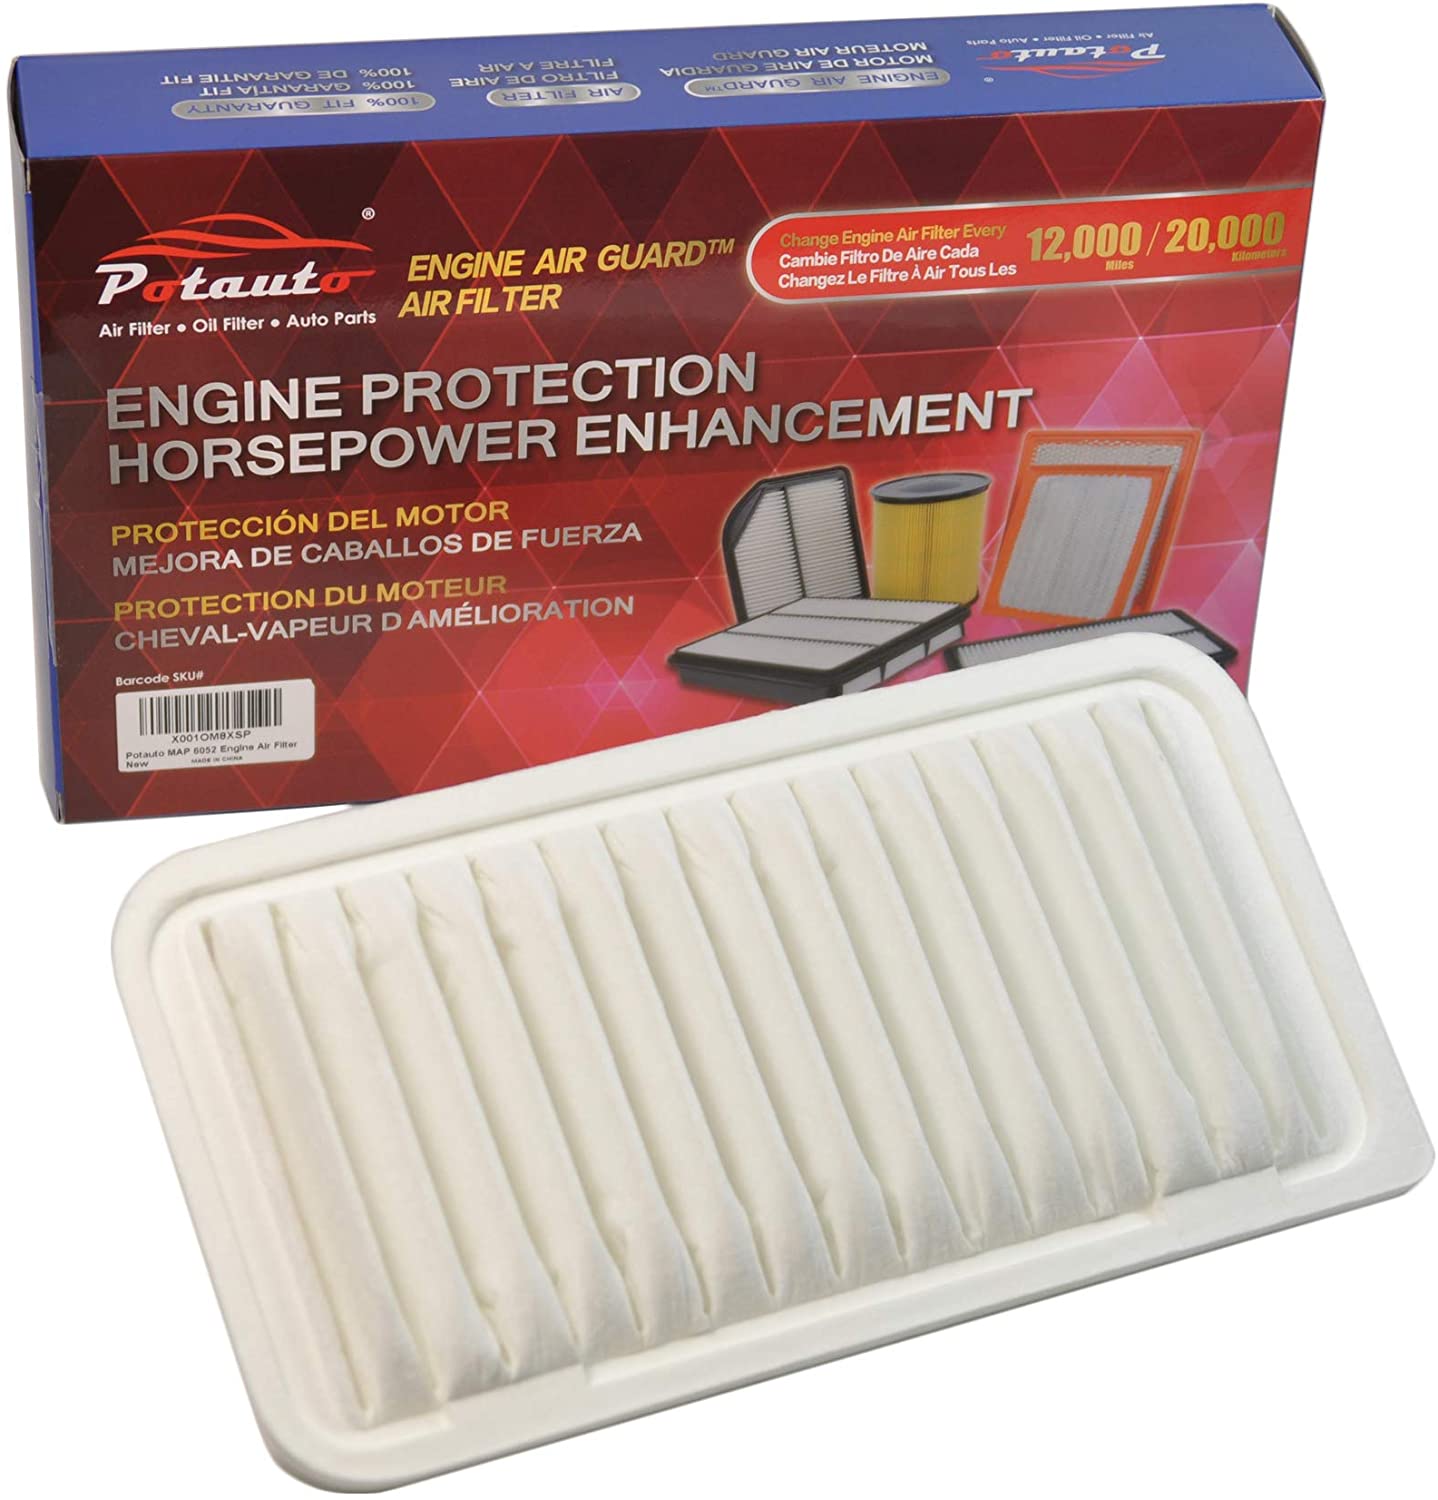 POTAUTO MAP 6052 (CA9482) Engine Air Guard Filter Compatible Aftermarket Replacement Part